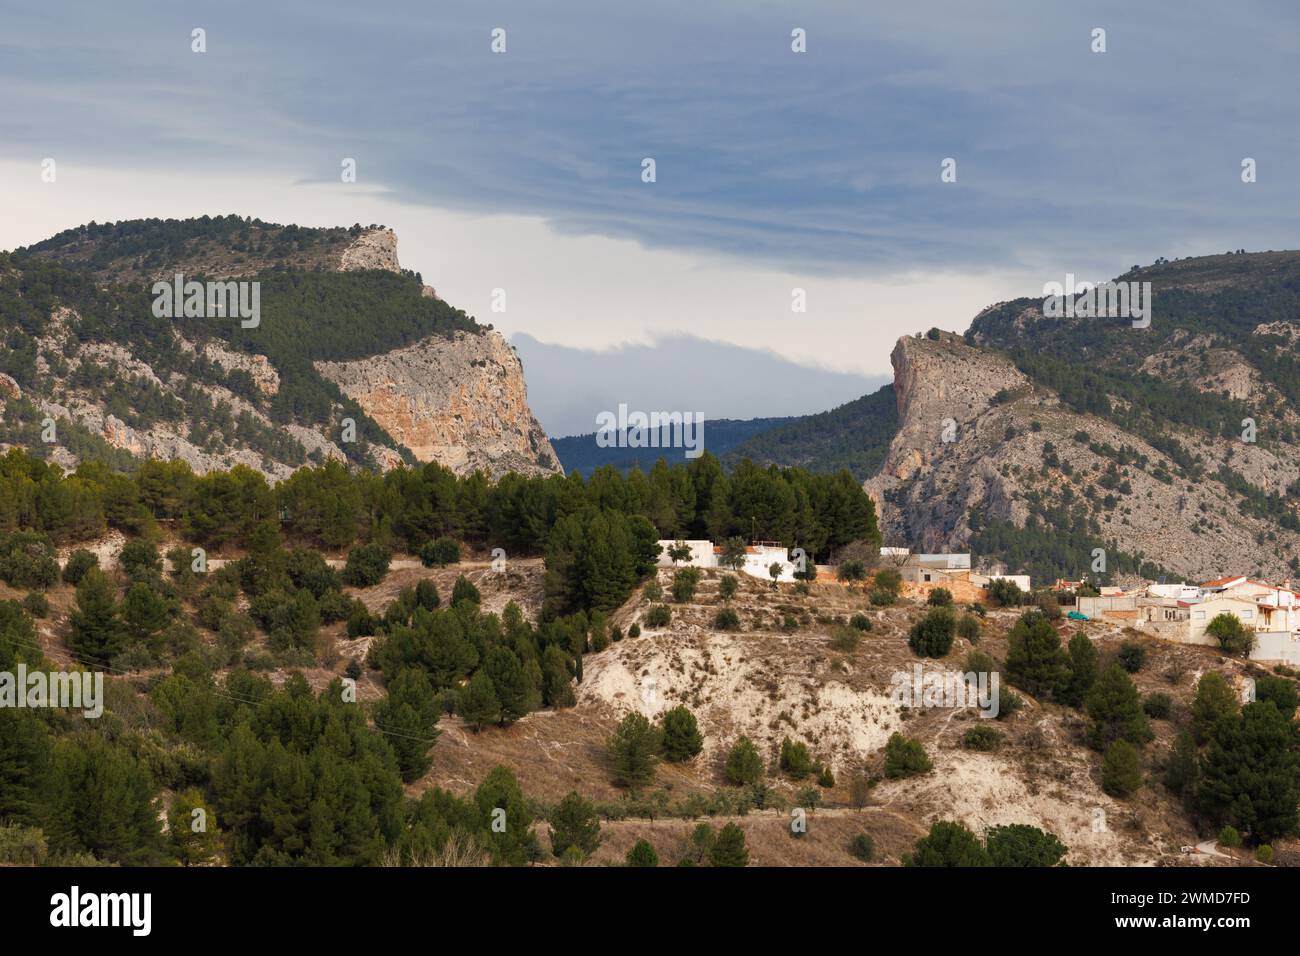 Landscape on cloudy day with the Barranc del Cint of Alcoi, Spain Stock Photo